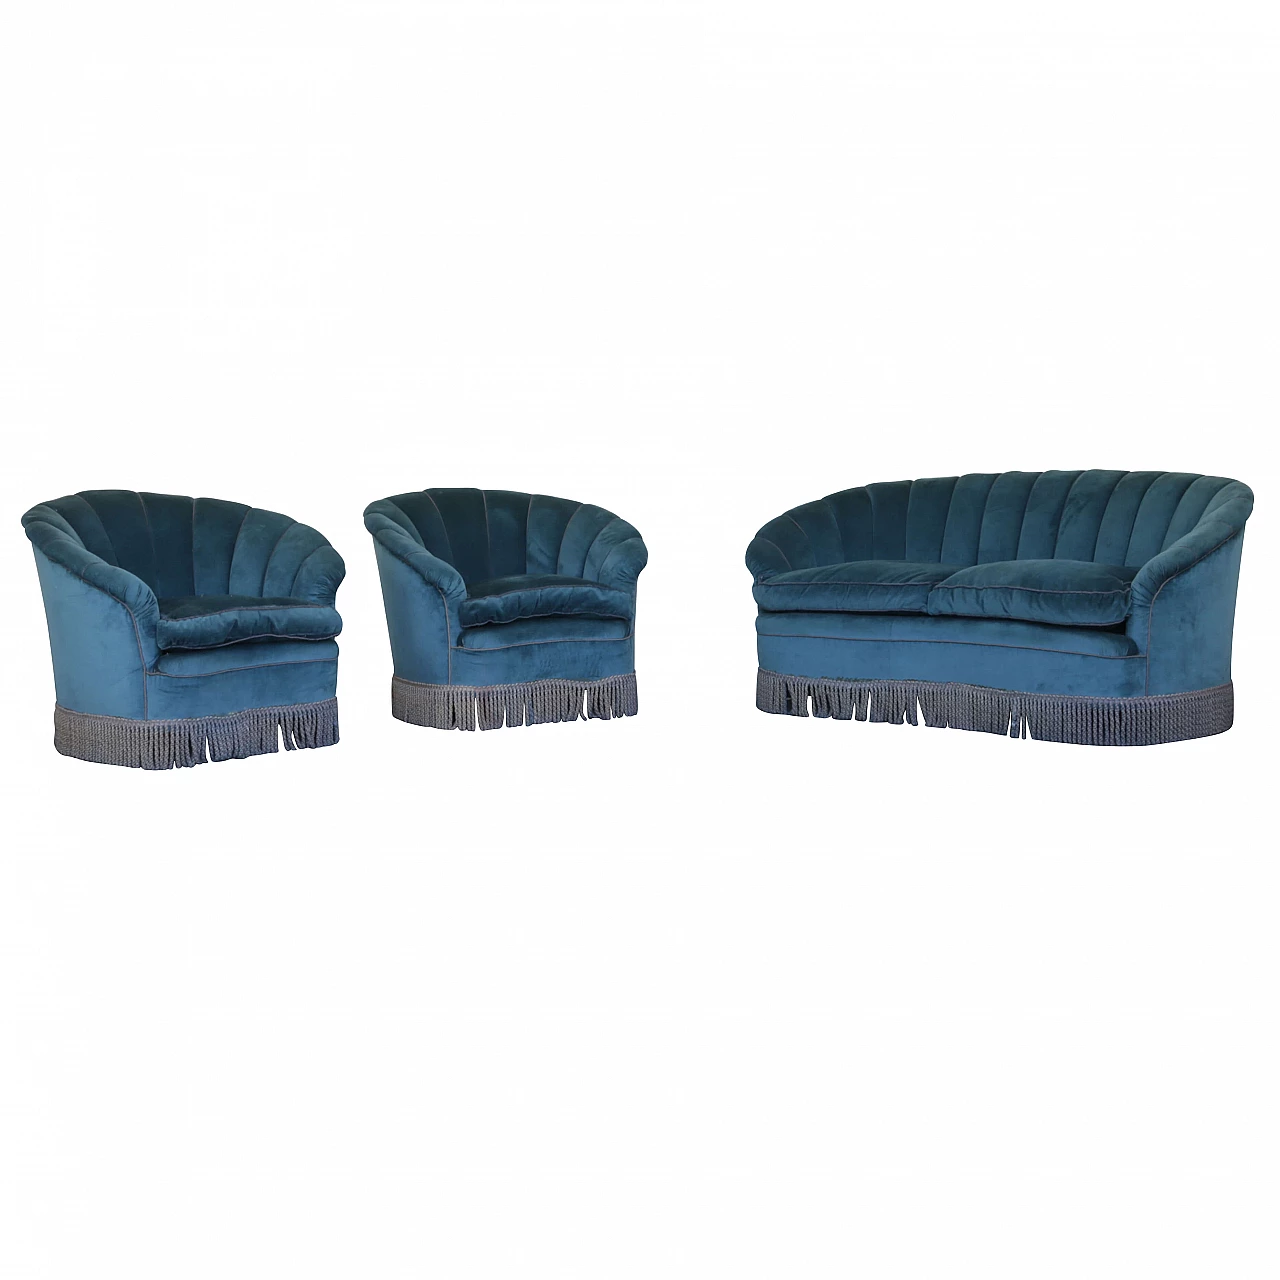 Sofa and two armchairs in turquoise velvet, 40s 1247776